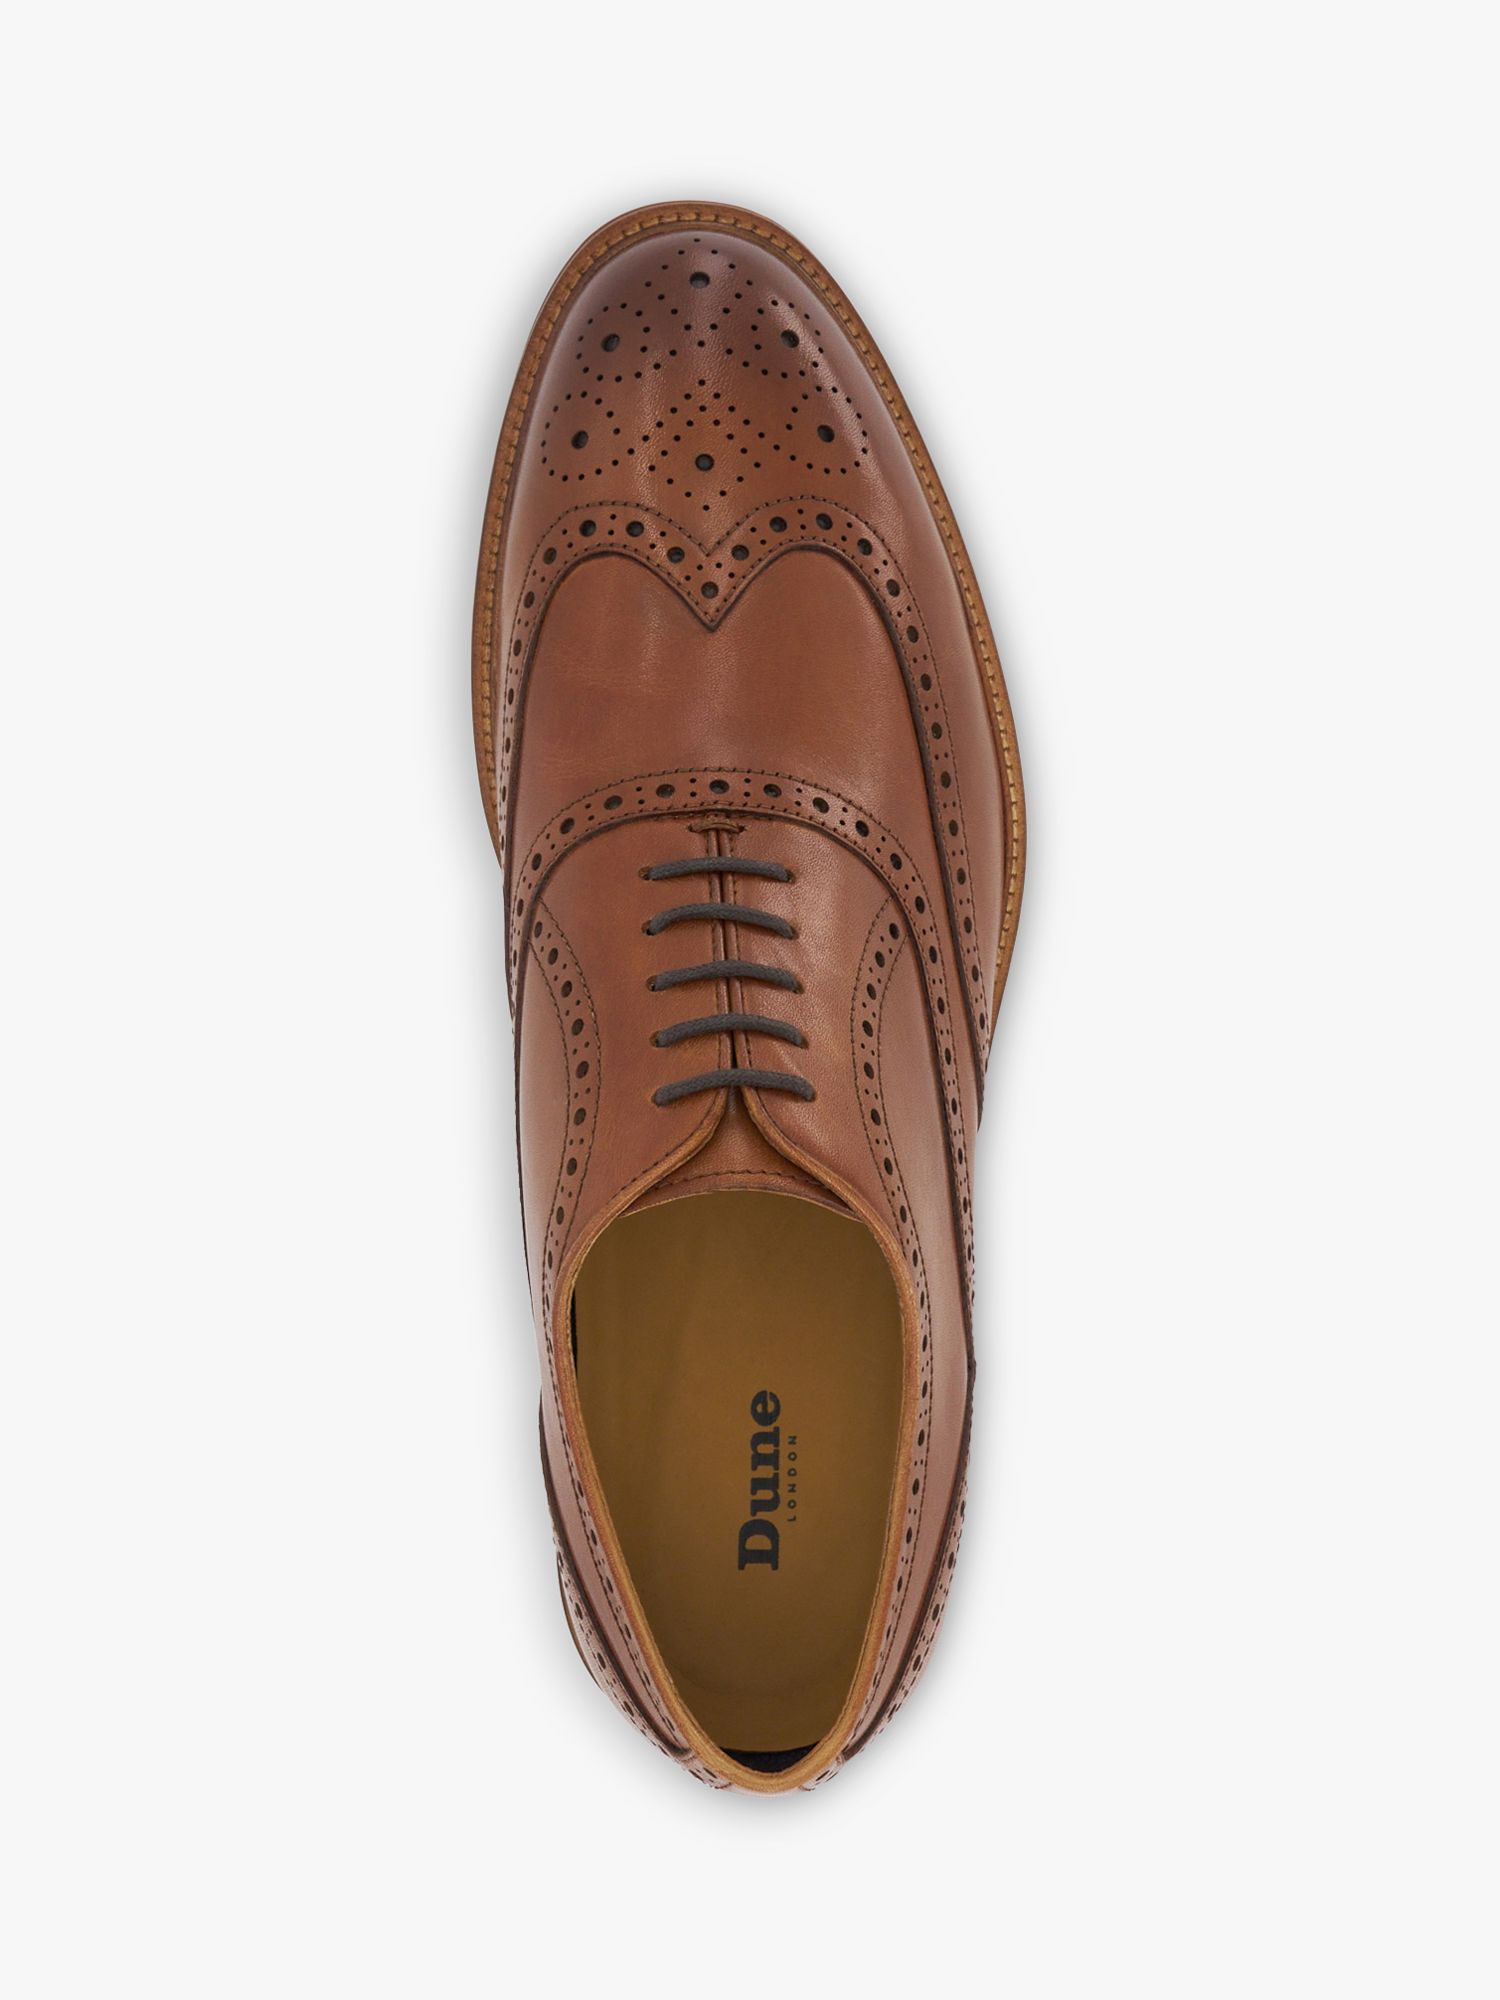 Dune Solihull Leather Brogue Shoes, Tan, 6